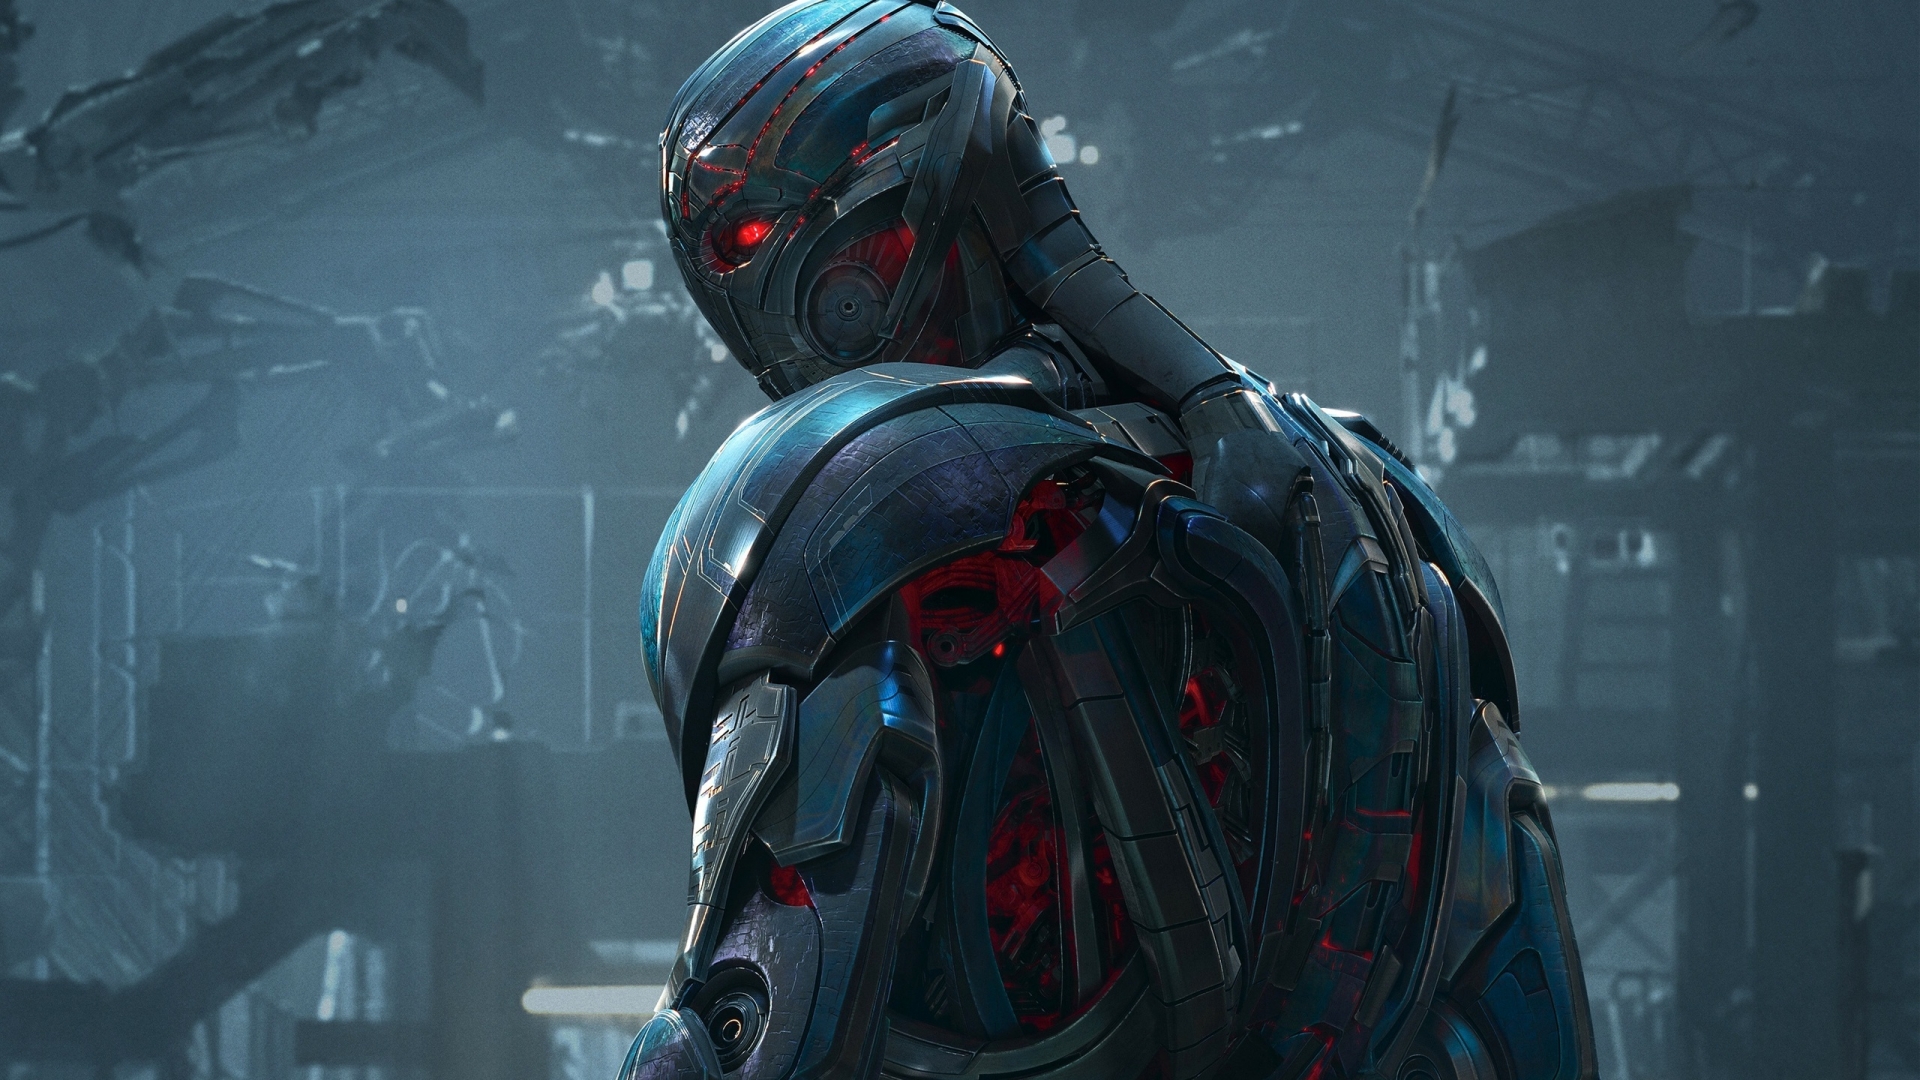 Ultron from Avengers for 1920 x 1080 HDTV 1080p resolution